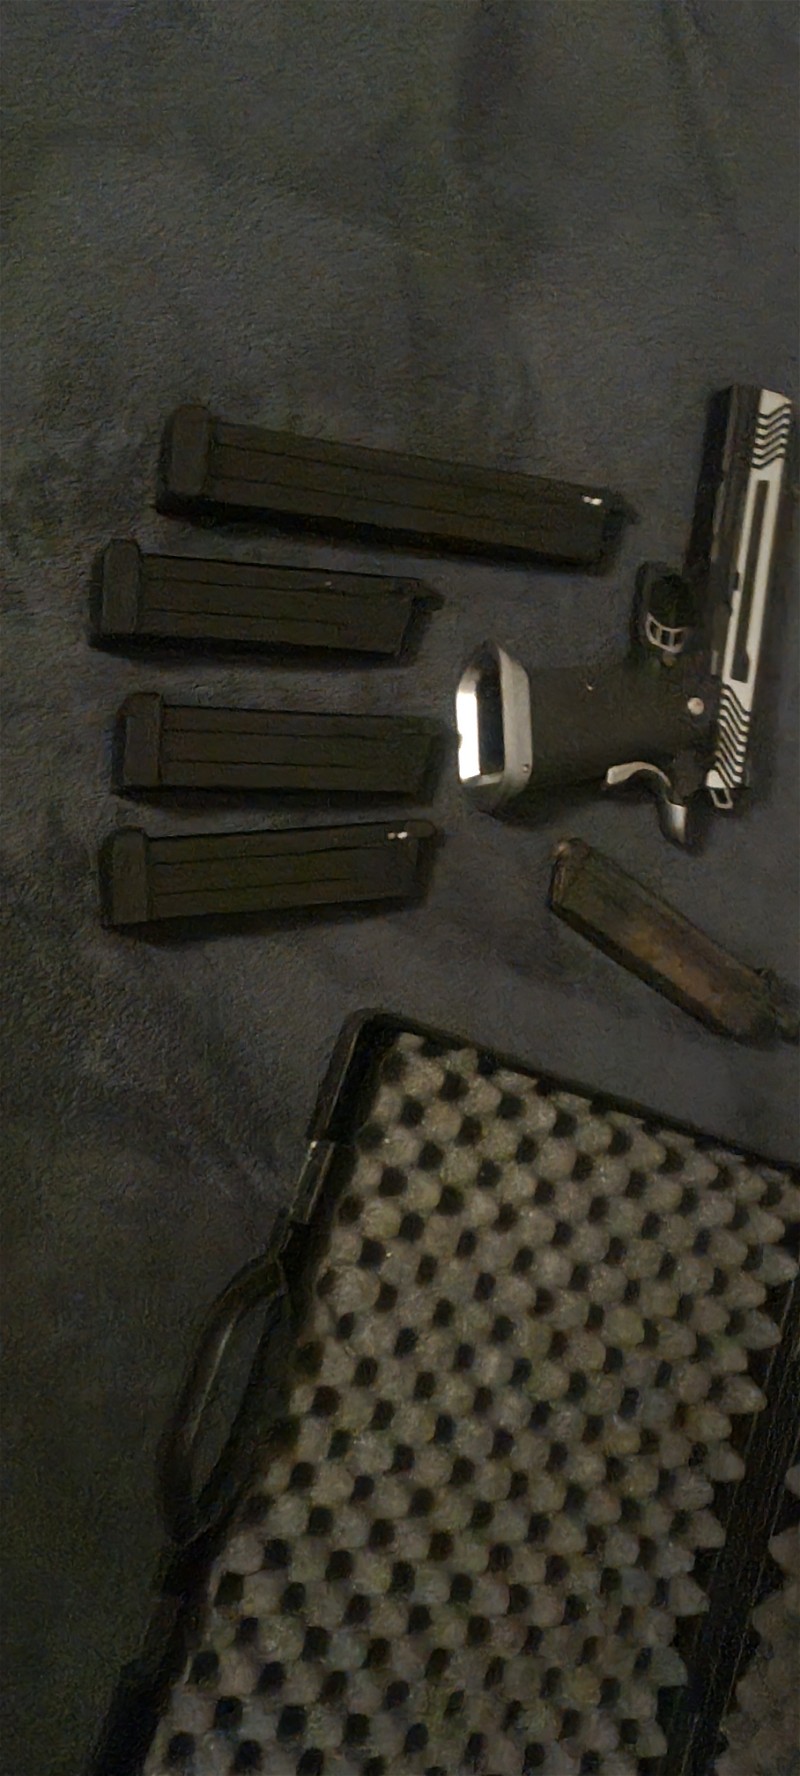 Image 1 for Hi capa 5.1 + 3 mags + 1 exstanded mag + holster + koffer